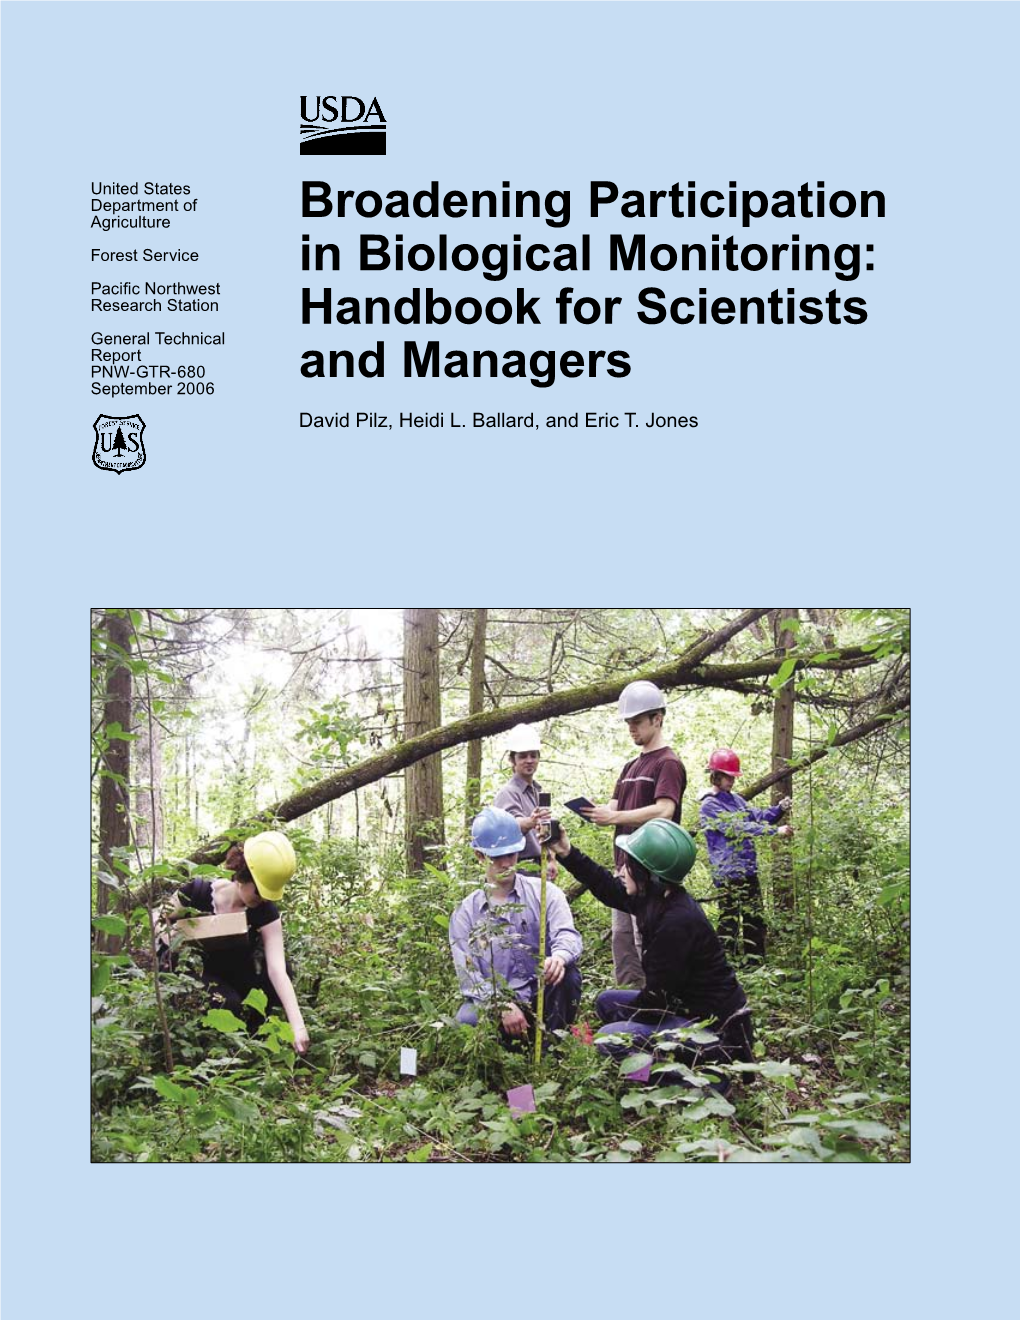 Broadening Participation in Biological Monitoring: Handbook for Scientists and Managers